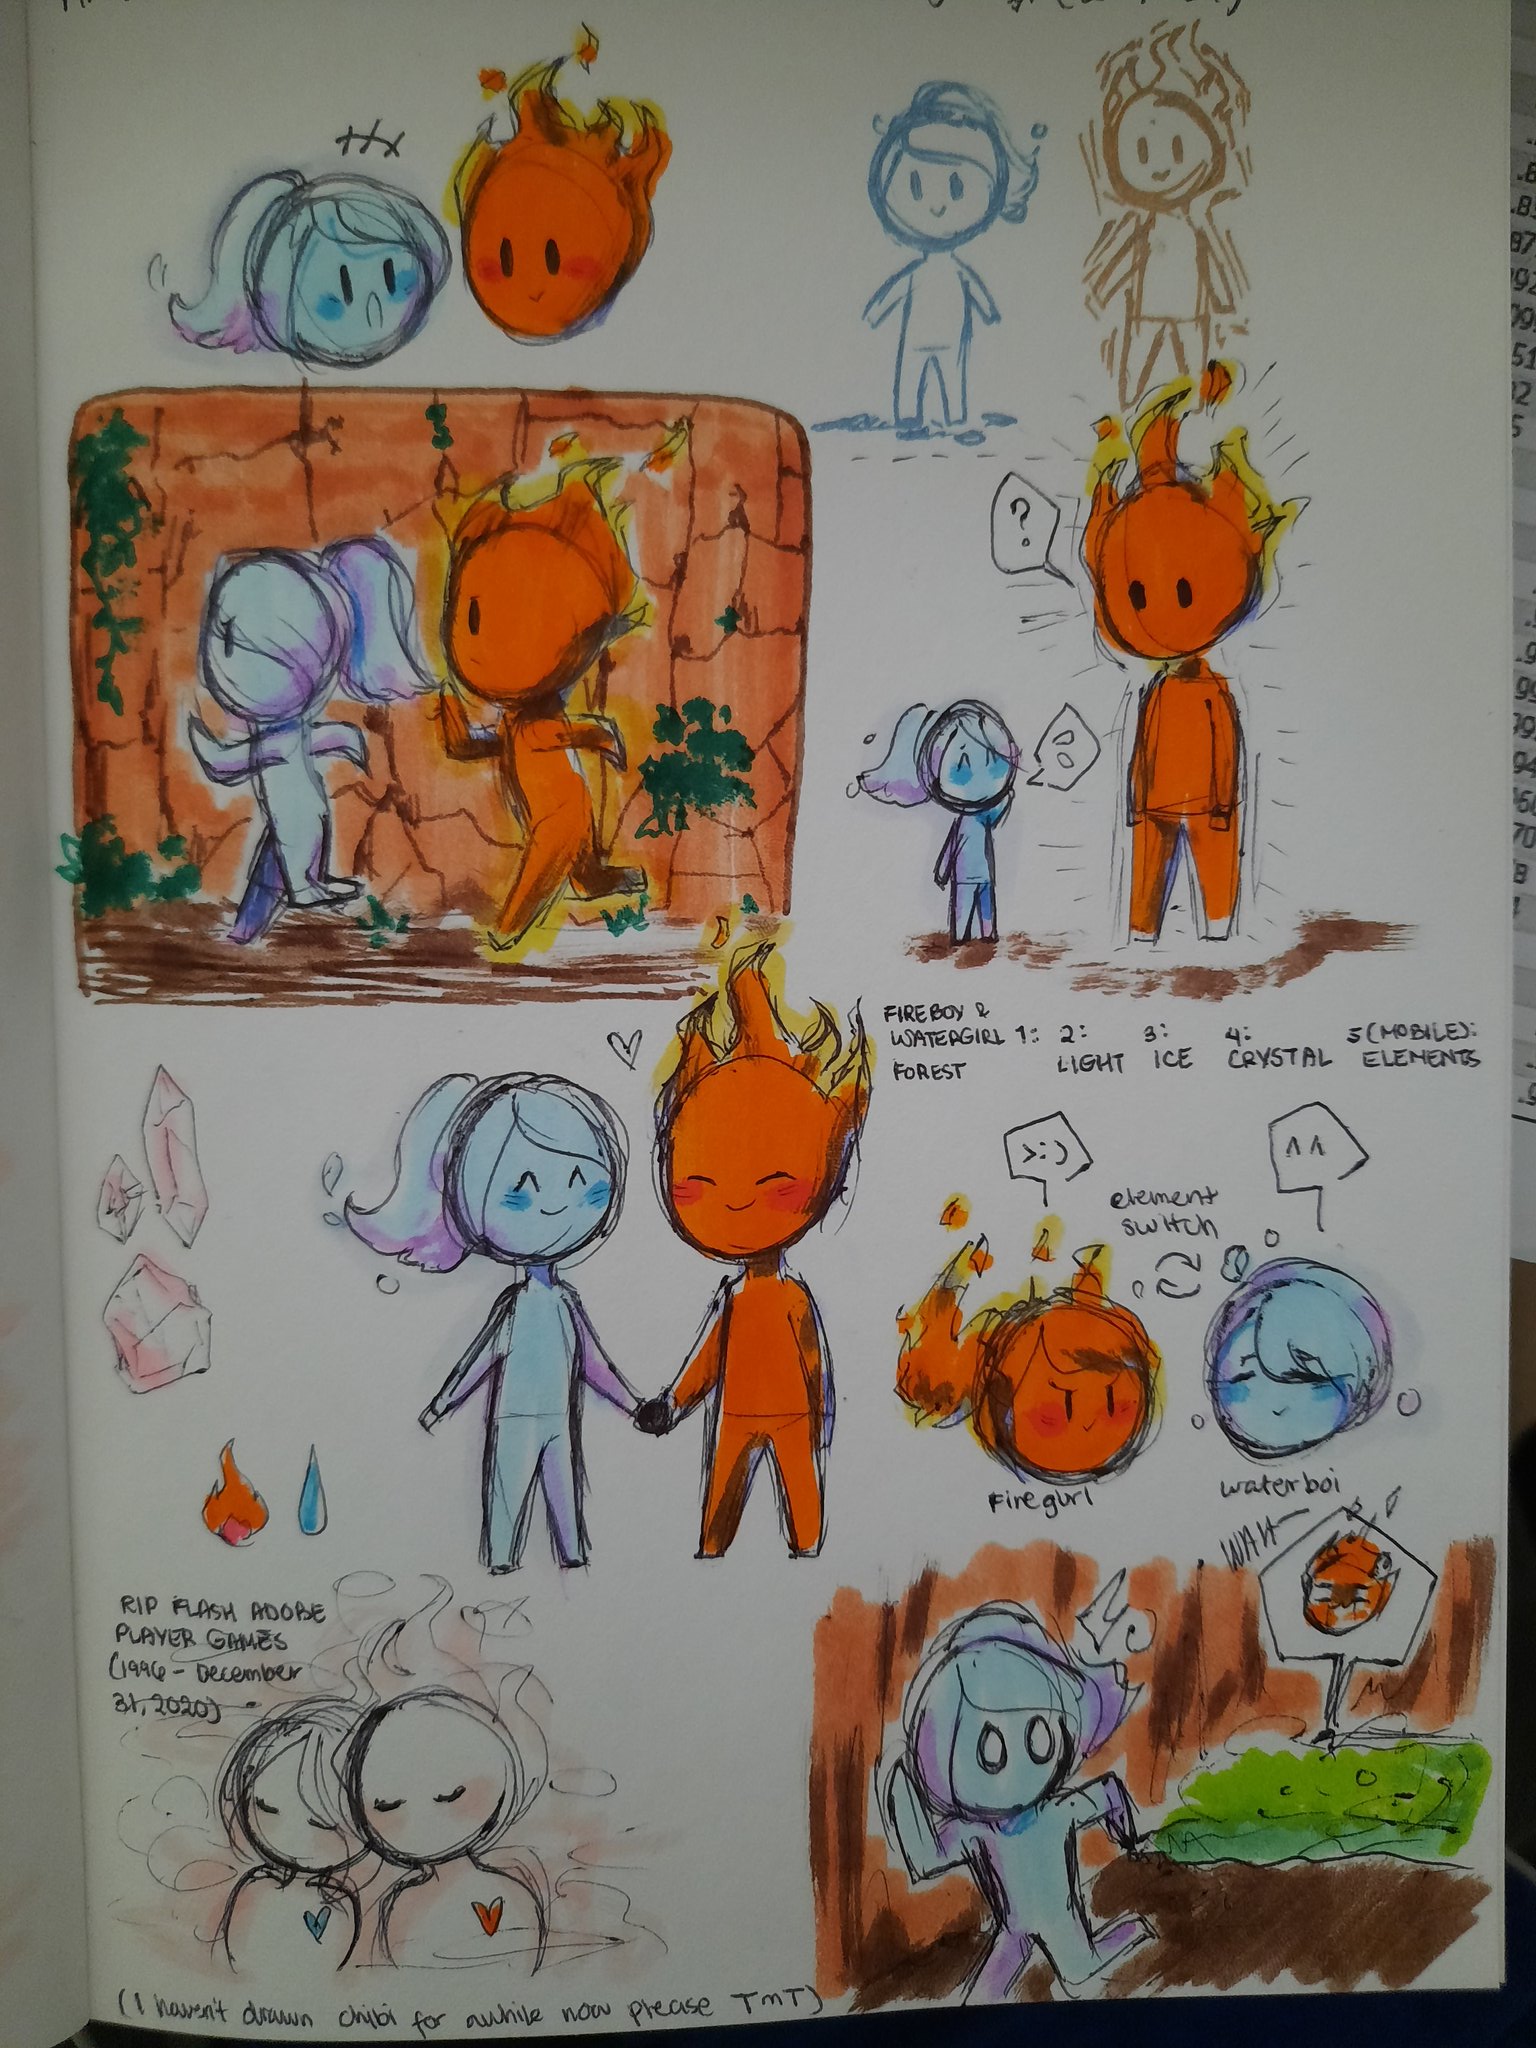 Pixilart - Fire boy and Water girl by DrawingPro